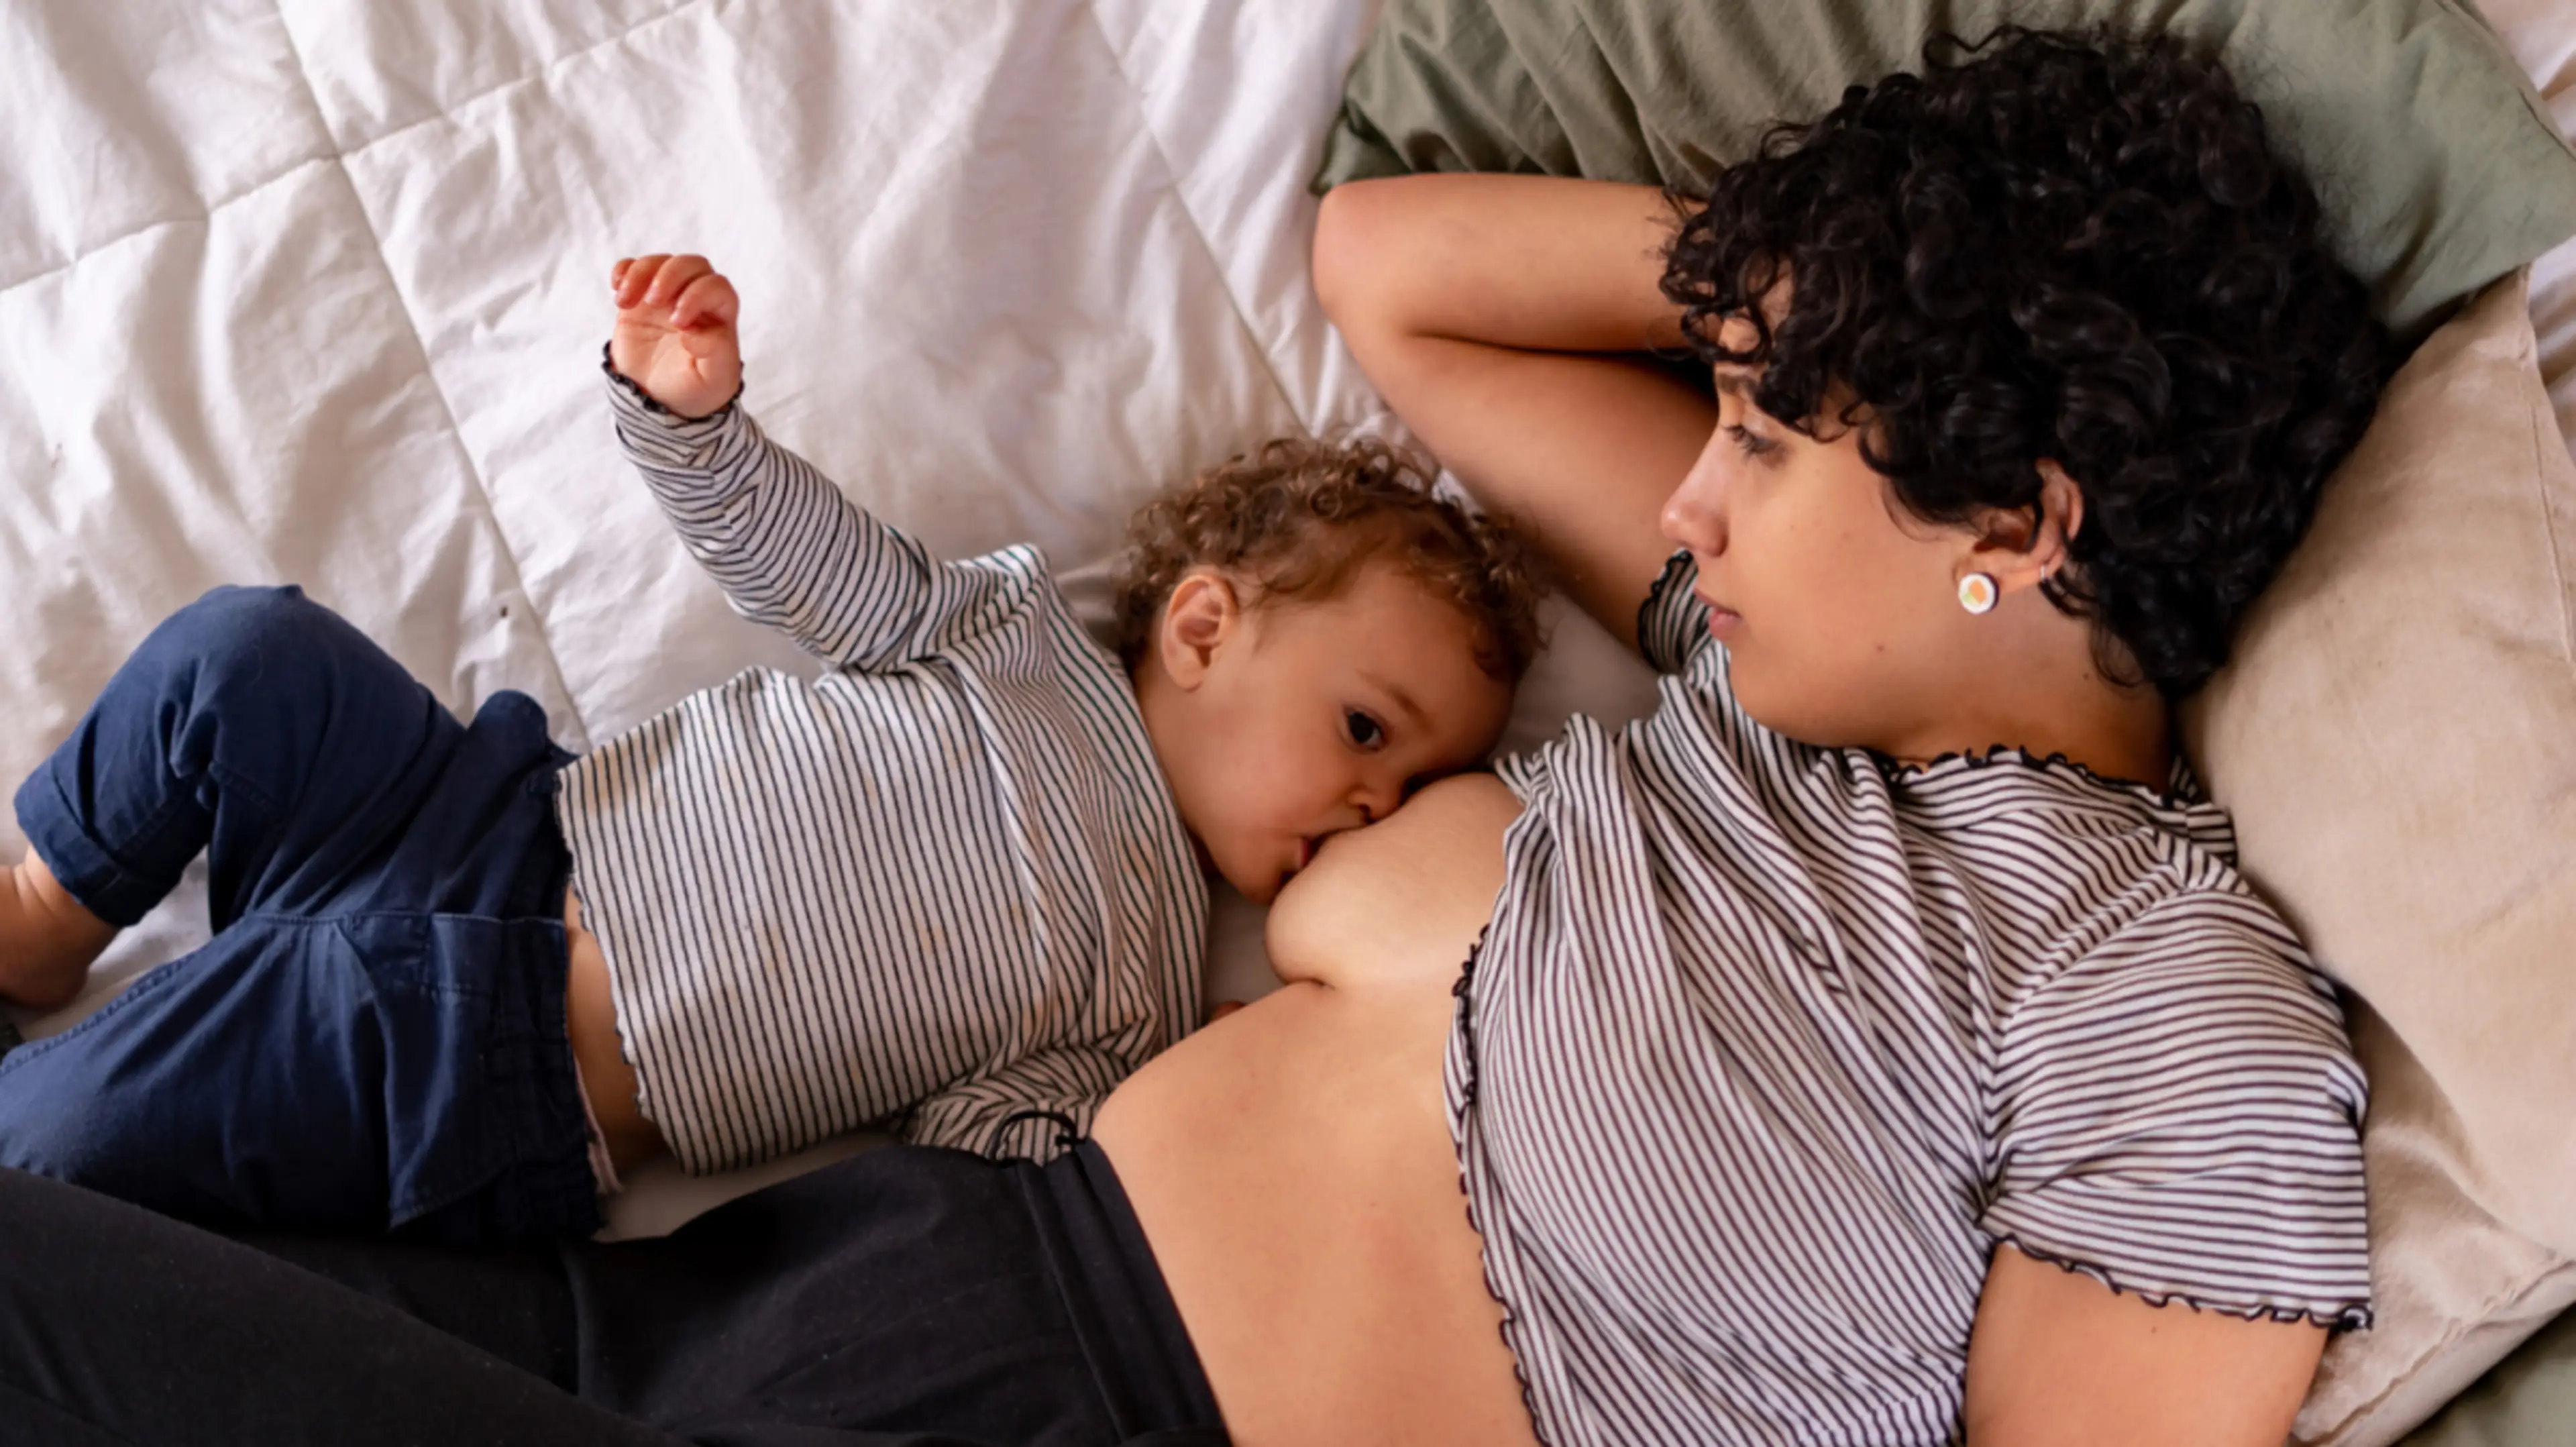 If You're Experiencing Breastfeeding Aversion, Know You're Not Alone